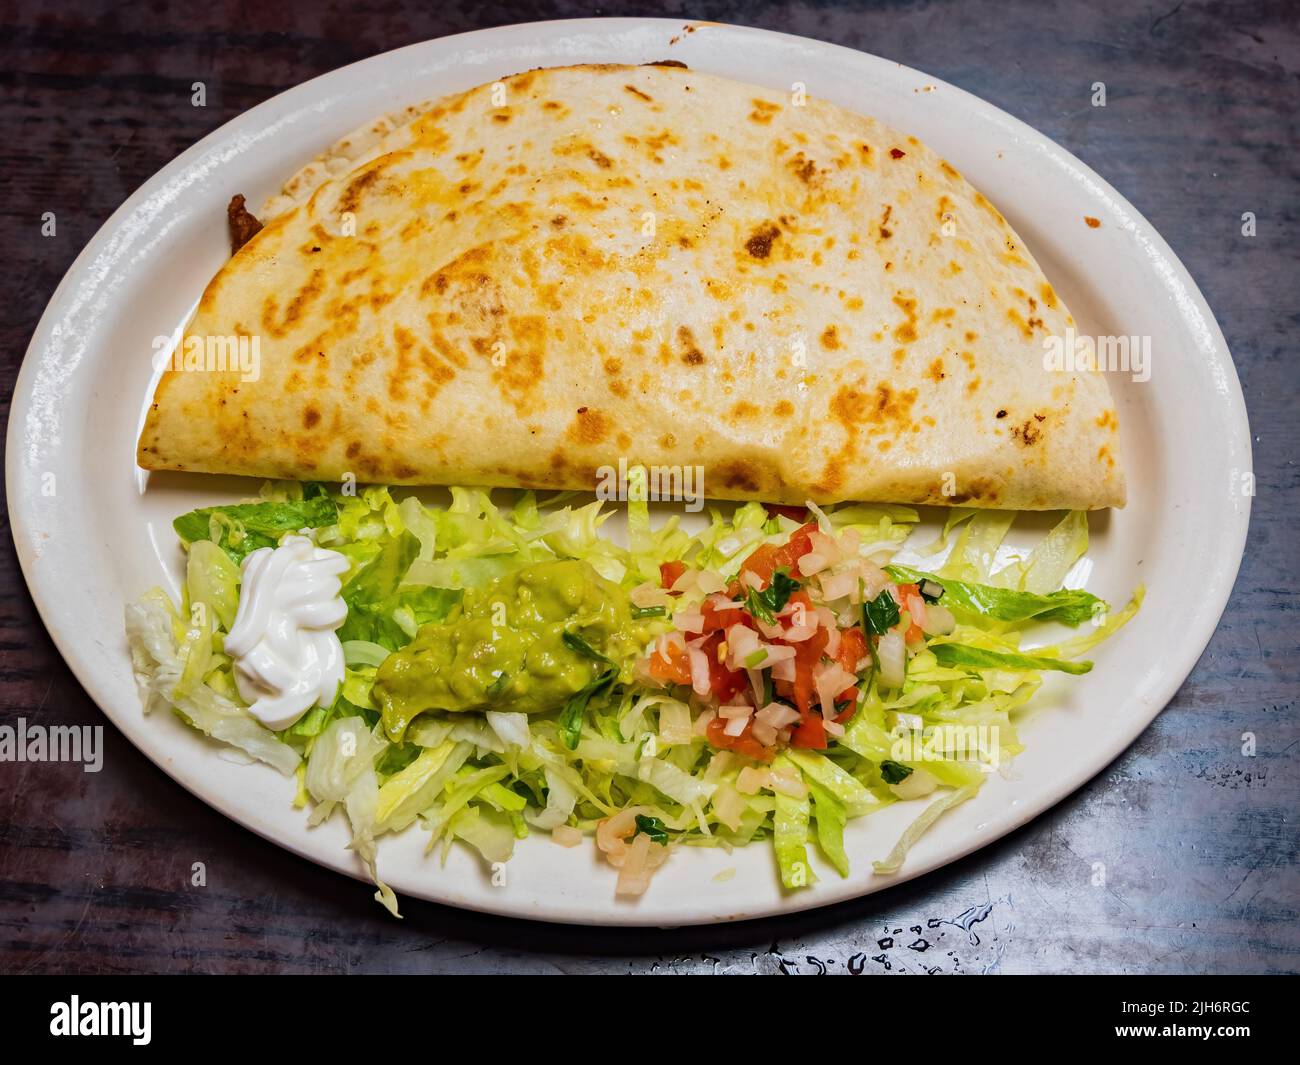 Close up shot of Mexician style beef taco with salad at Colorado Stock Photo